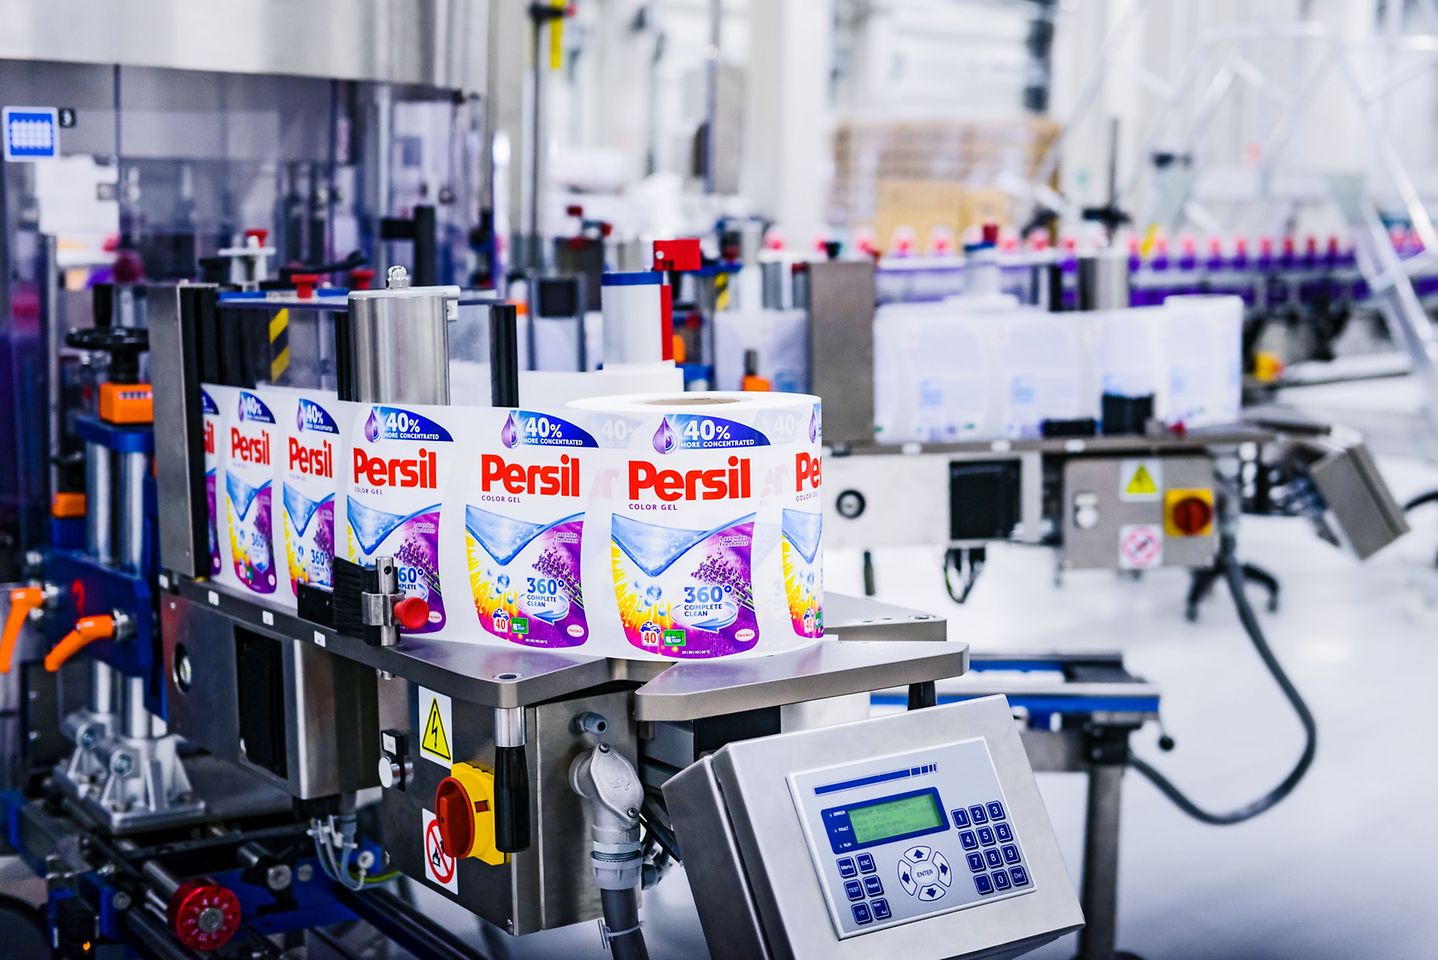 The new production line is an answer to the growing demand for gel detergents